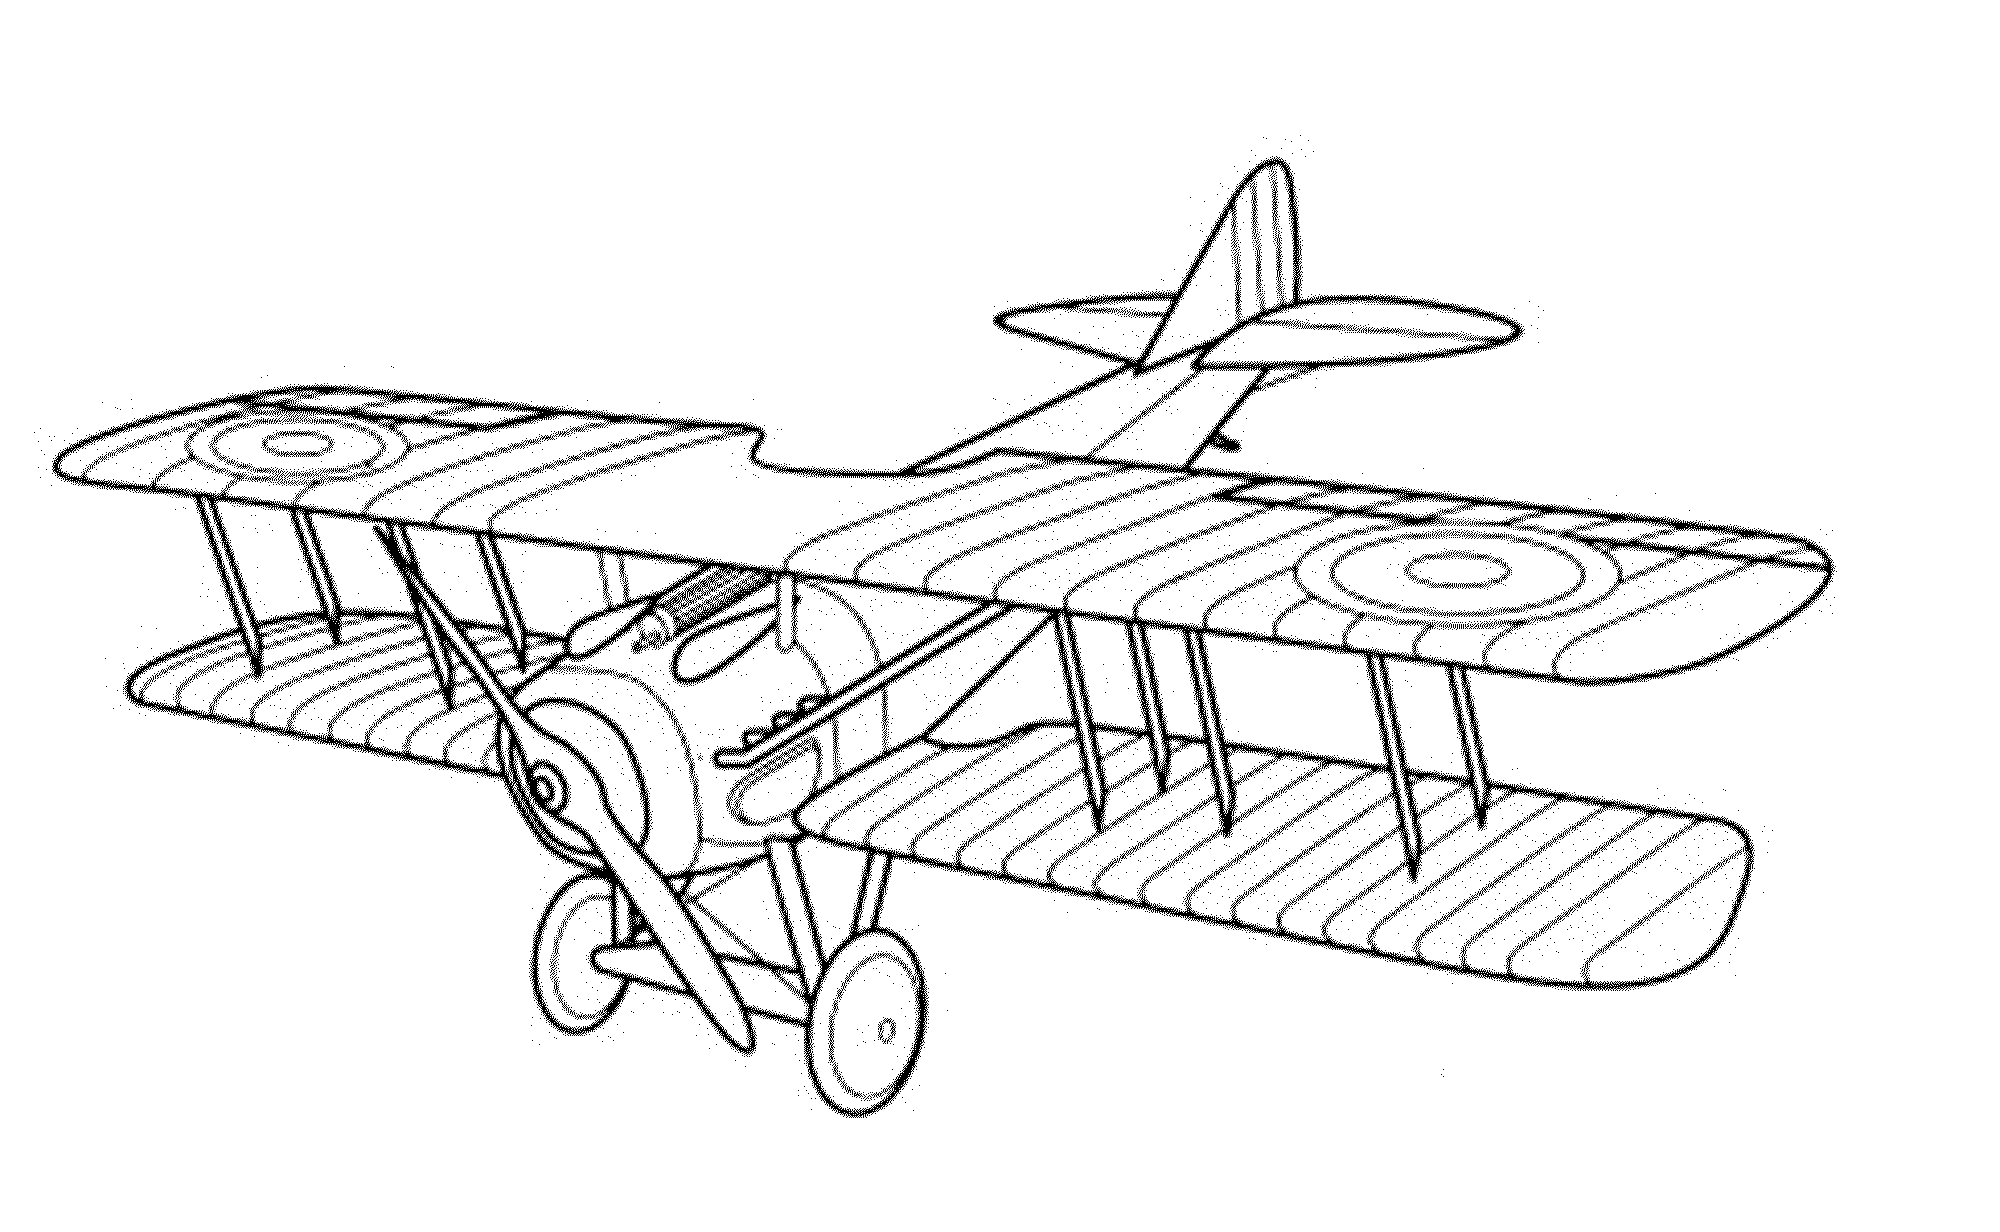 airplane detailed adult coloring page